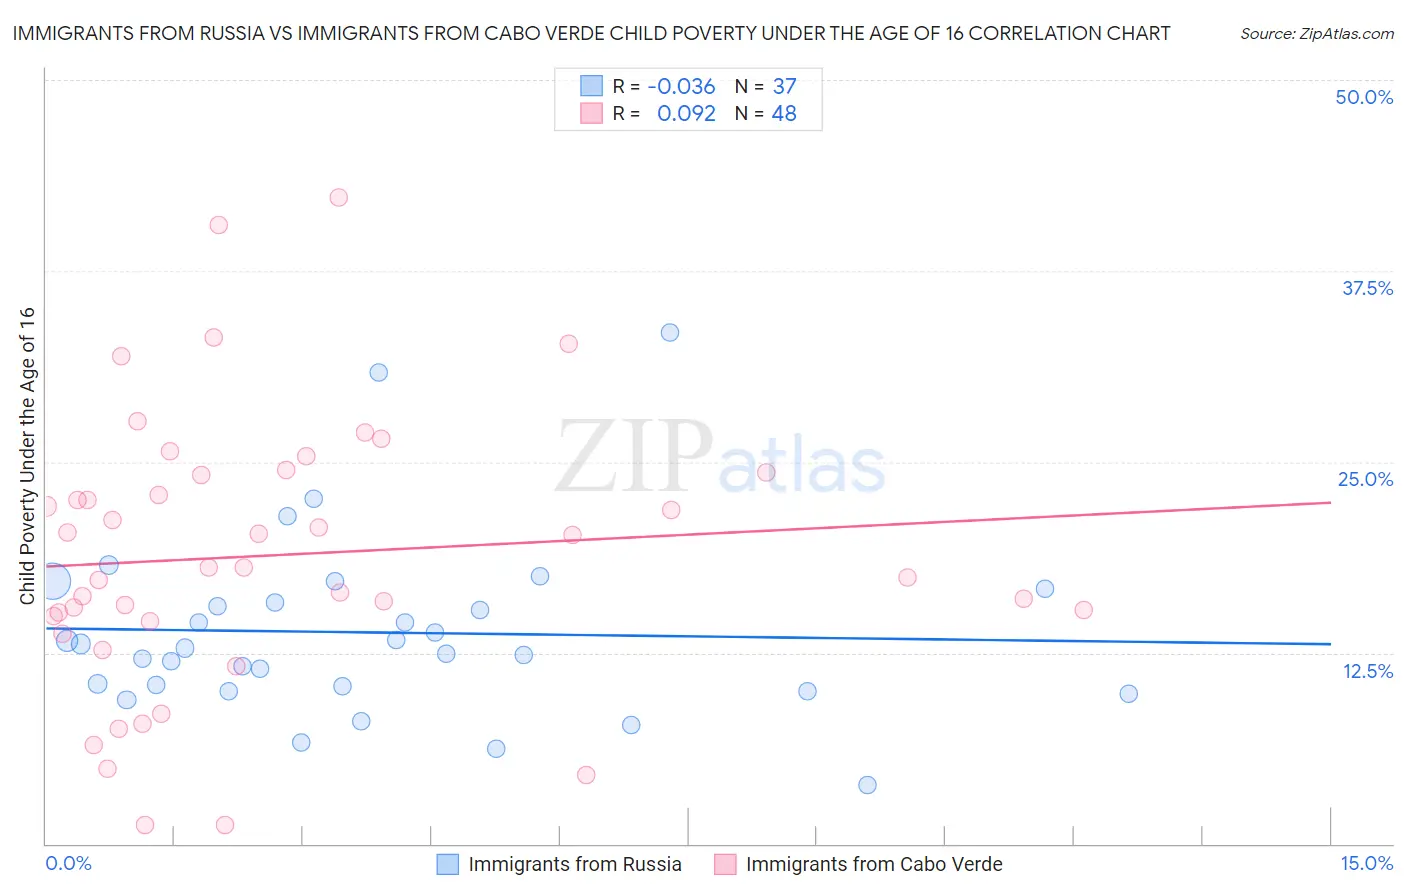 Immigrants from Russia vs Immigrants from Cabo Verde Child Poverty Under the Age of 16